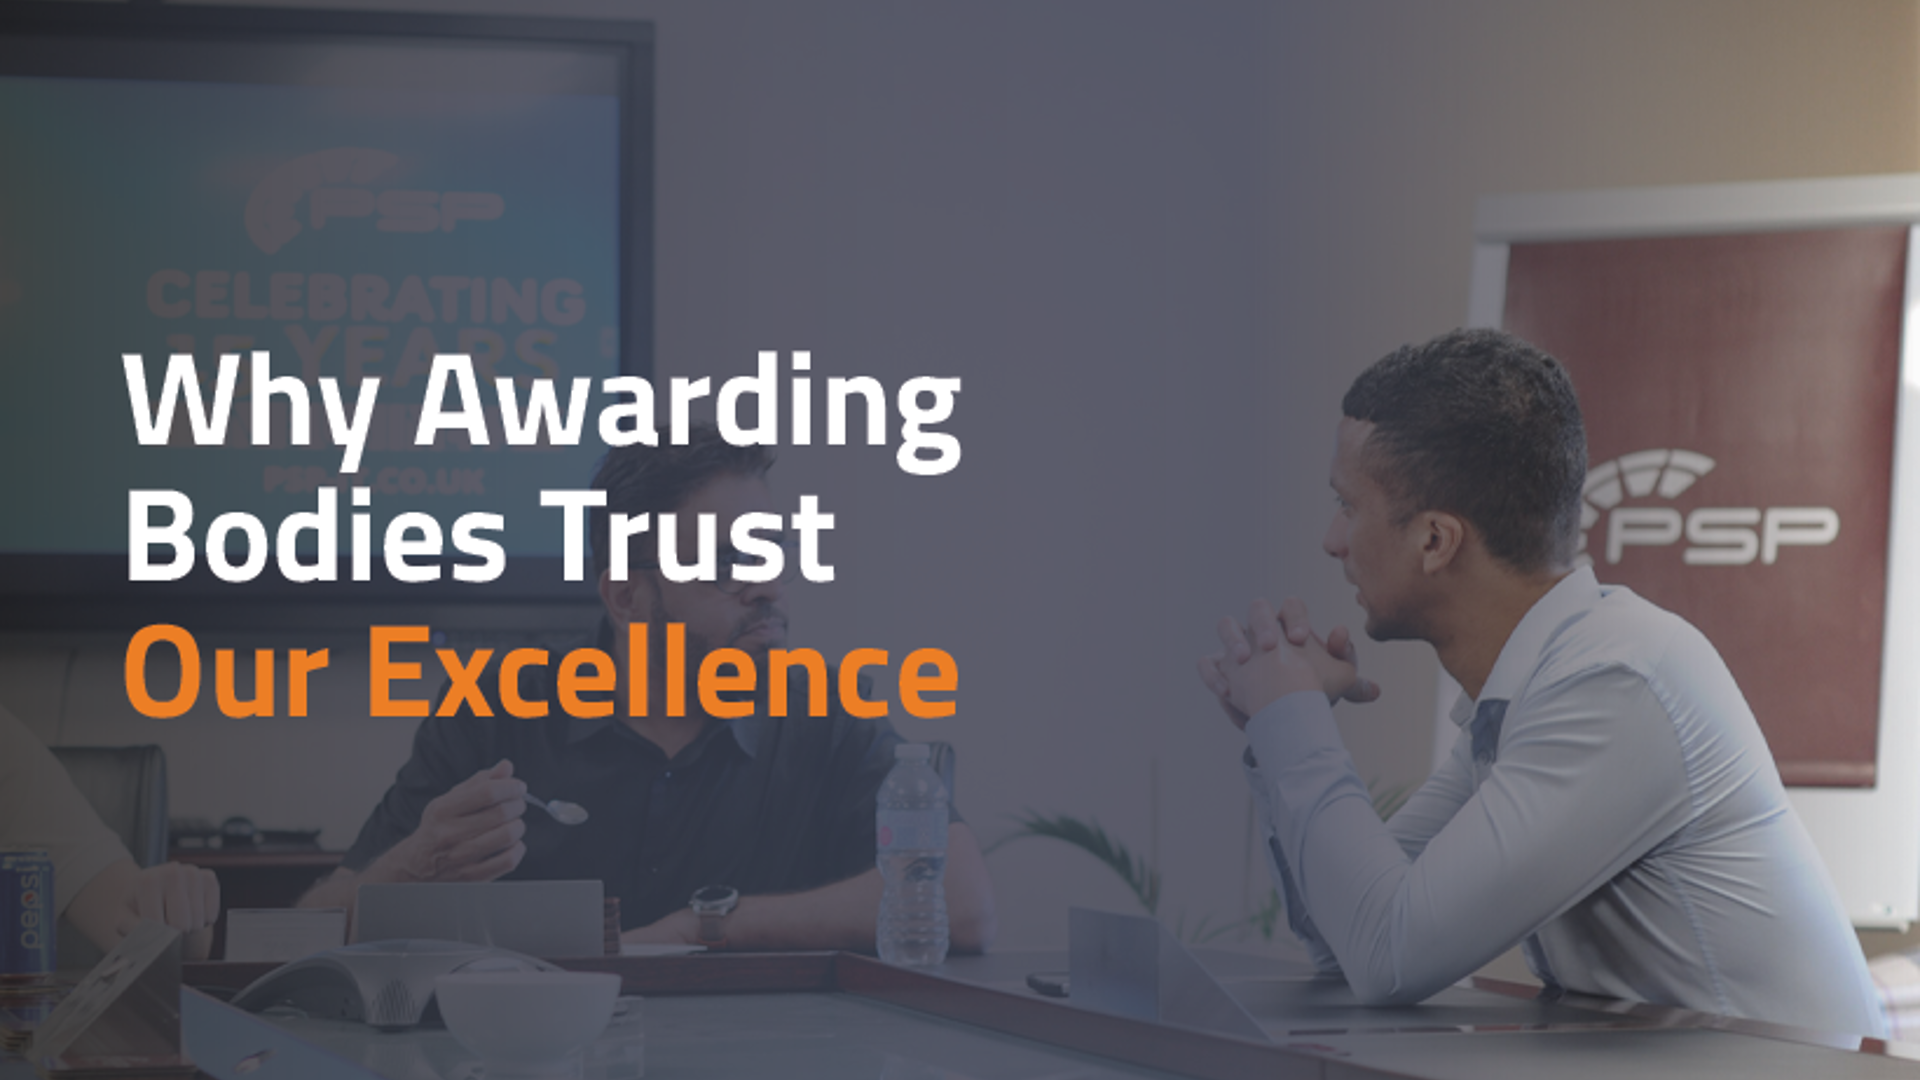 Why awarding bodies trust our excellence